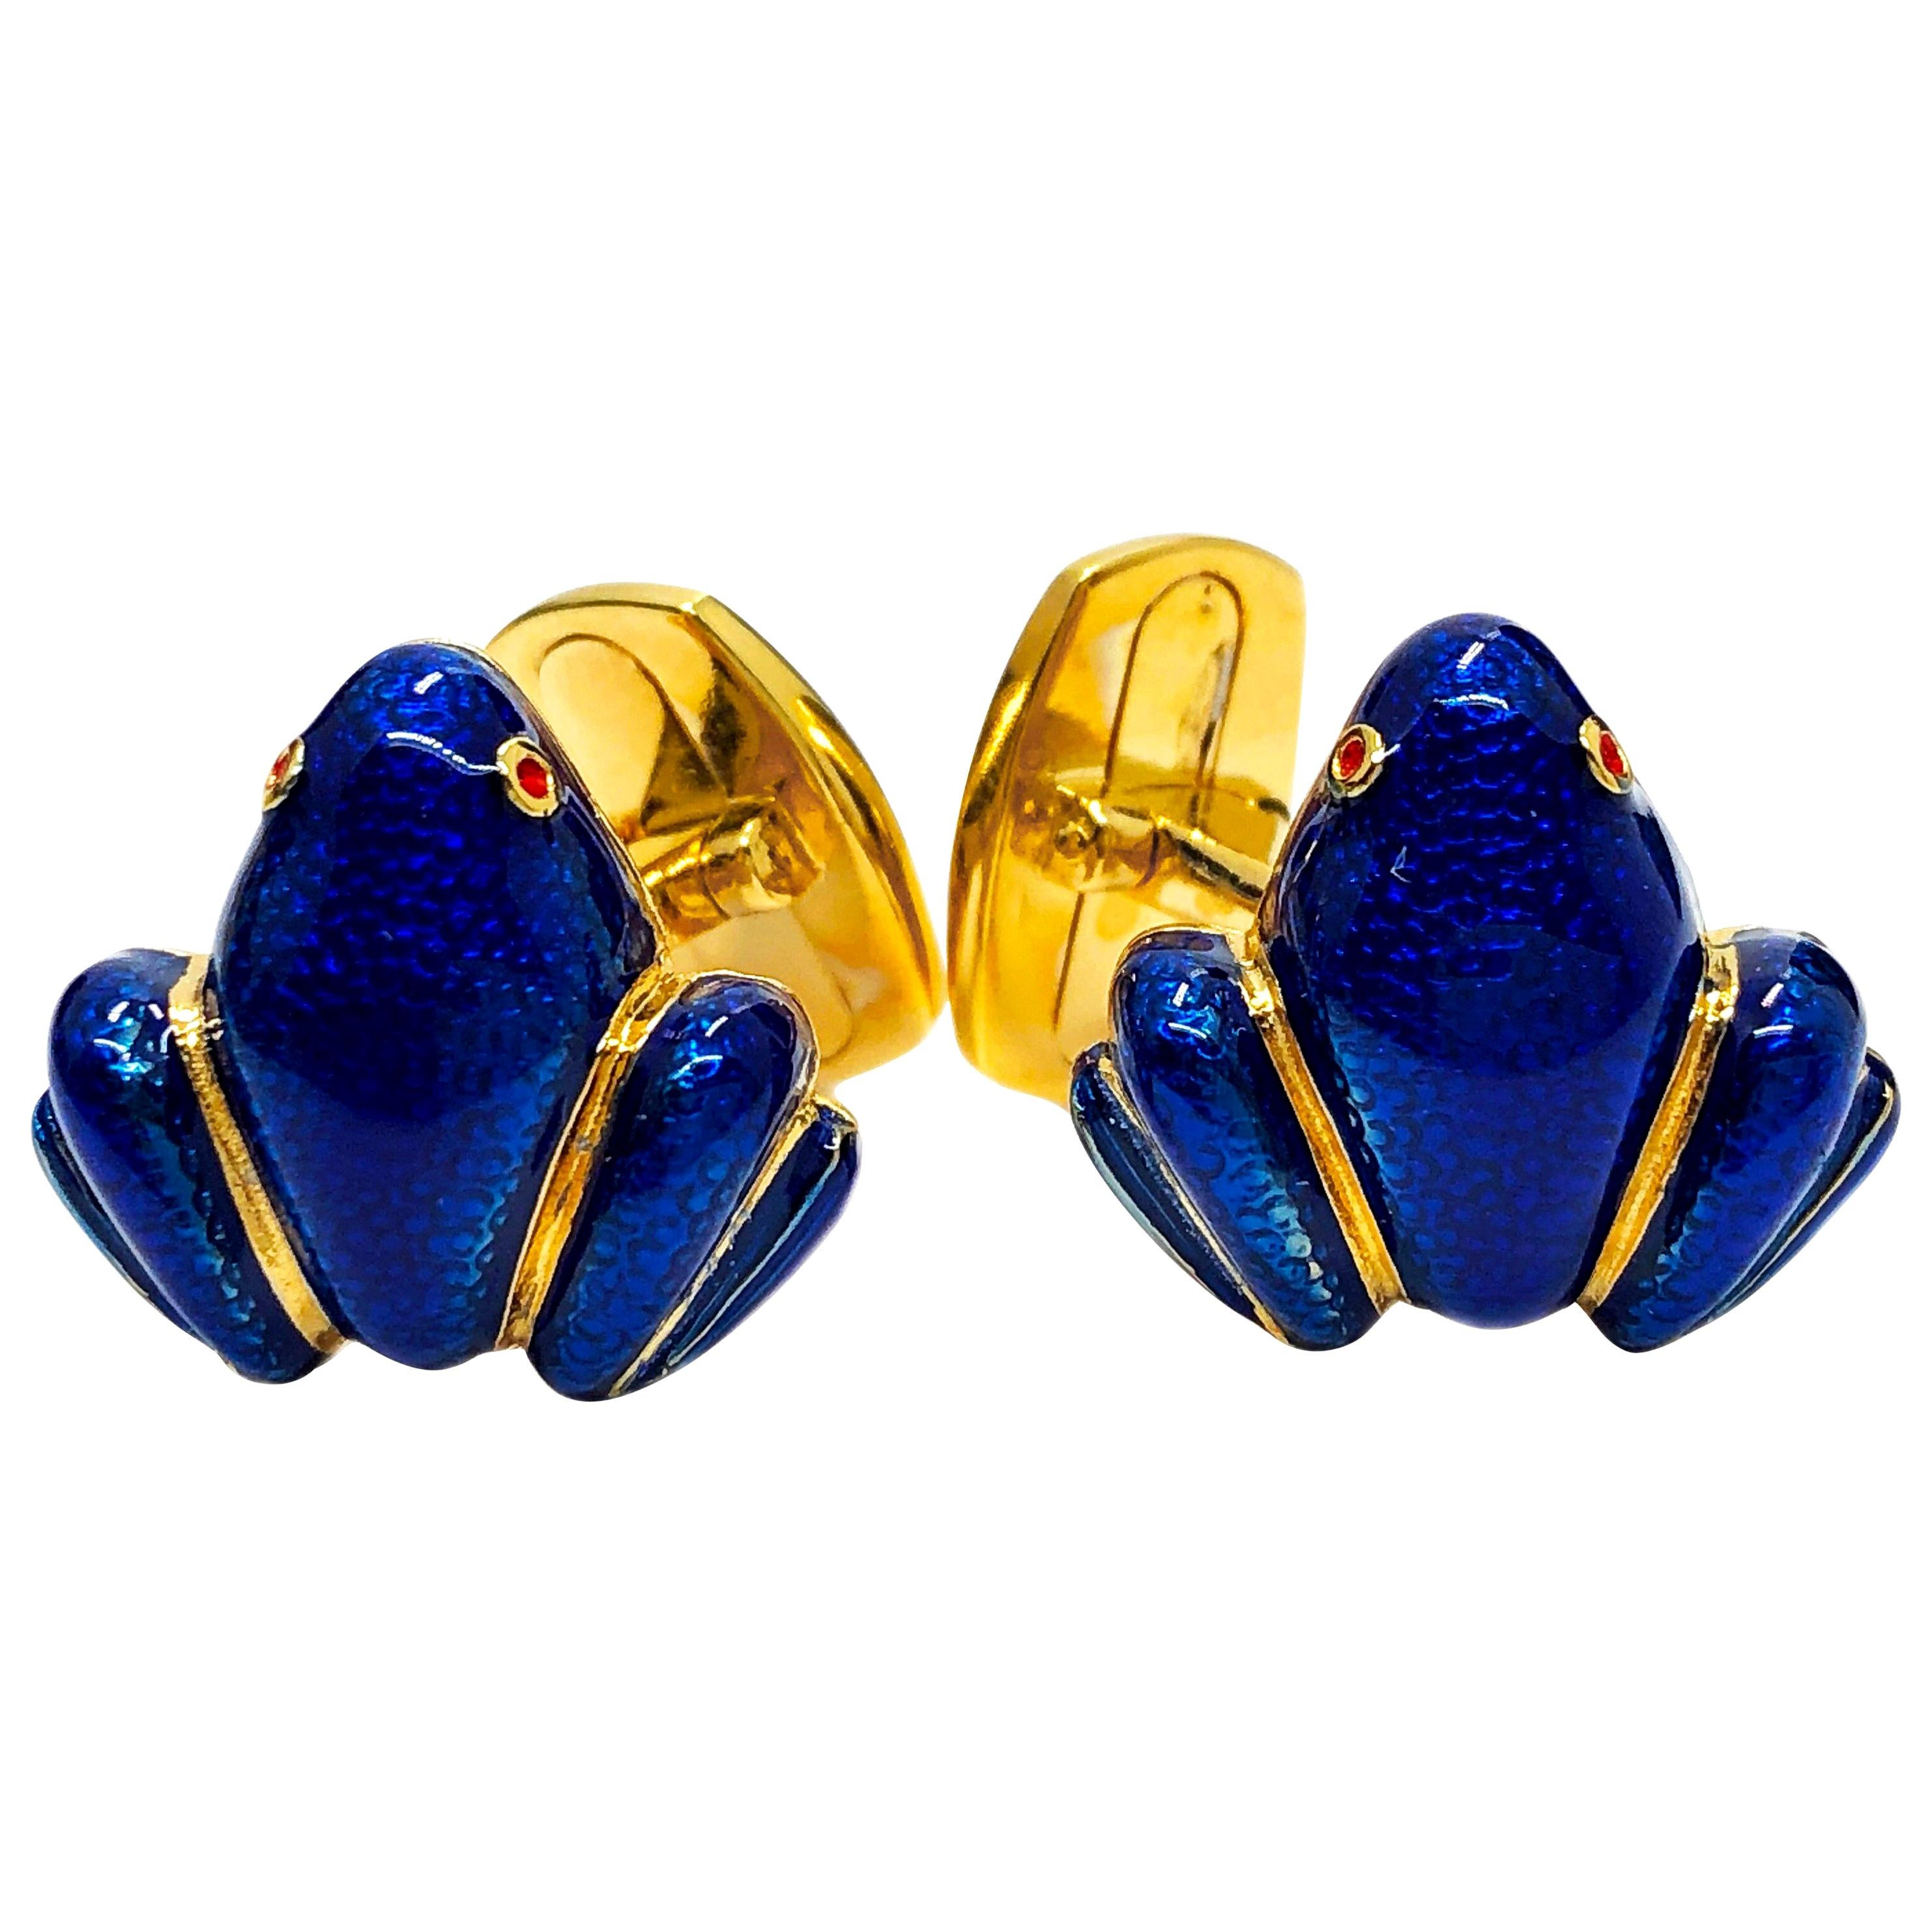 Berca Navy Blue Hand Enameled Frog Shaped Sterling Silver Gold-Plated Cufflinks